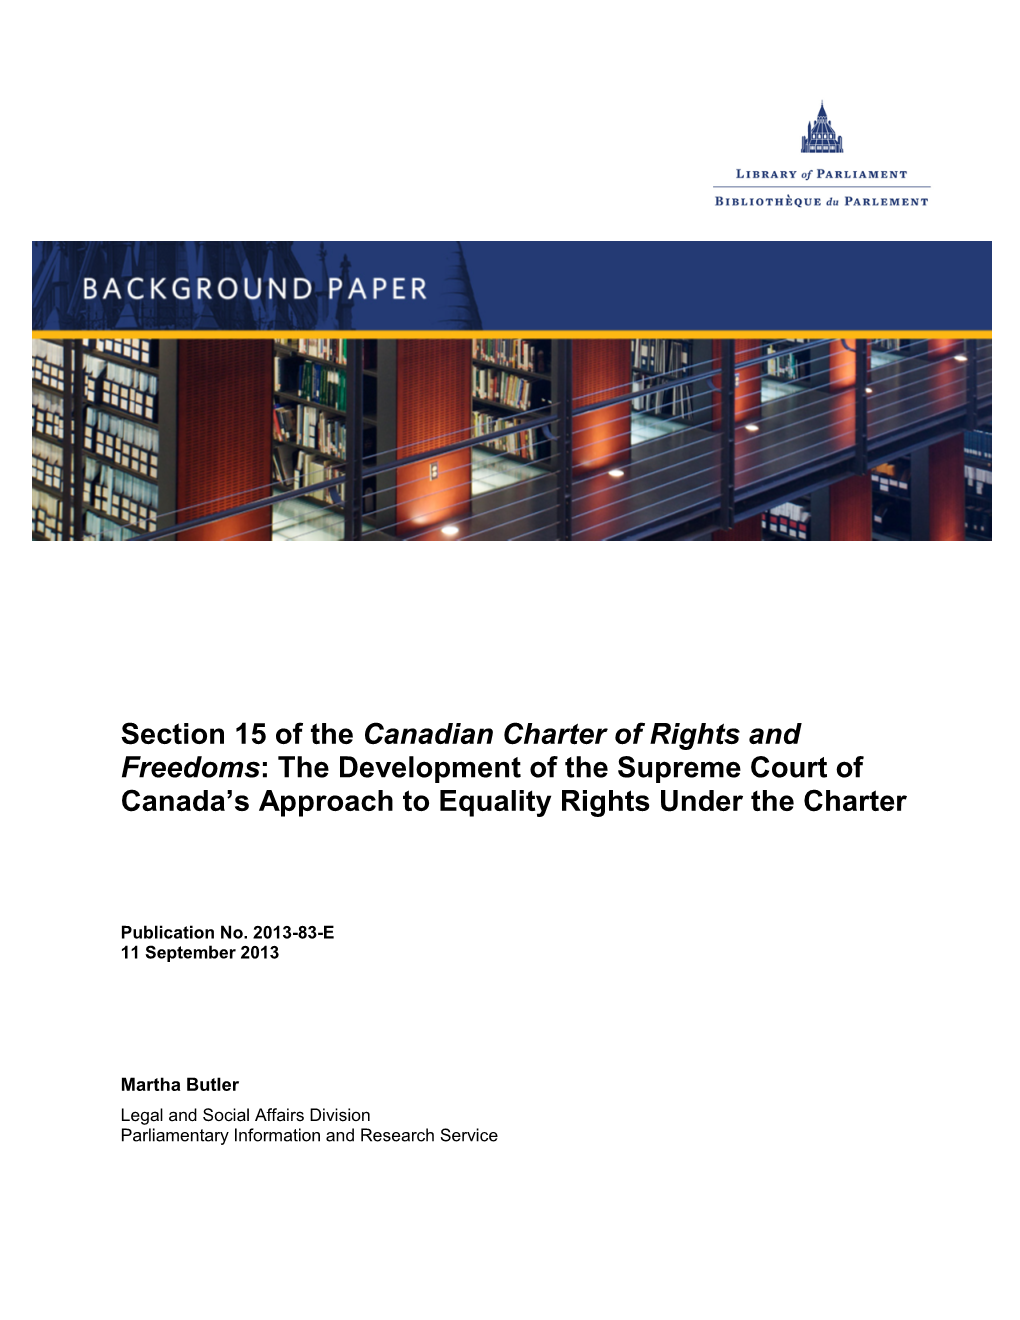 Section 15 of the Canadian Charter of Rights and Freedoms: the Development of the Supreme Court of Canada’S Approach to Equality Rights Under the Charter